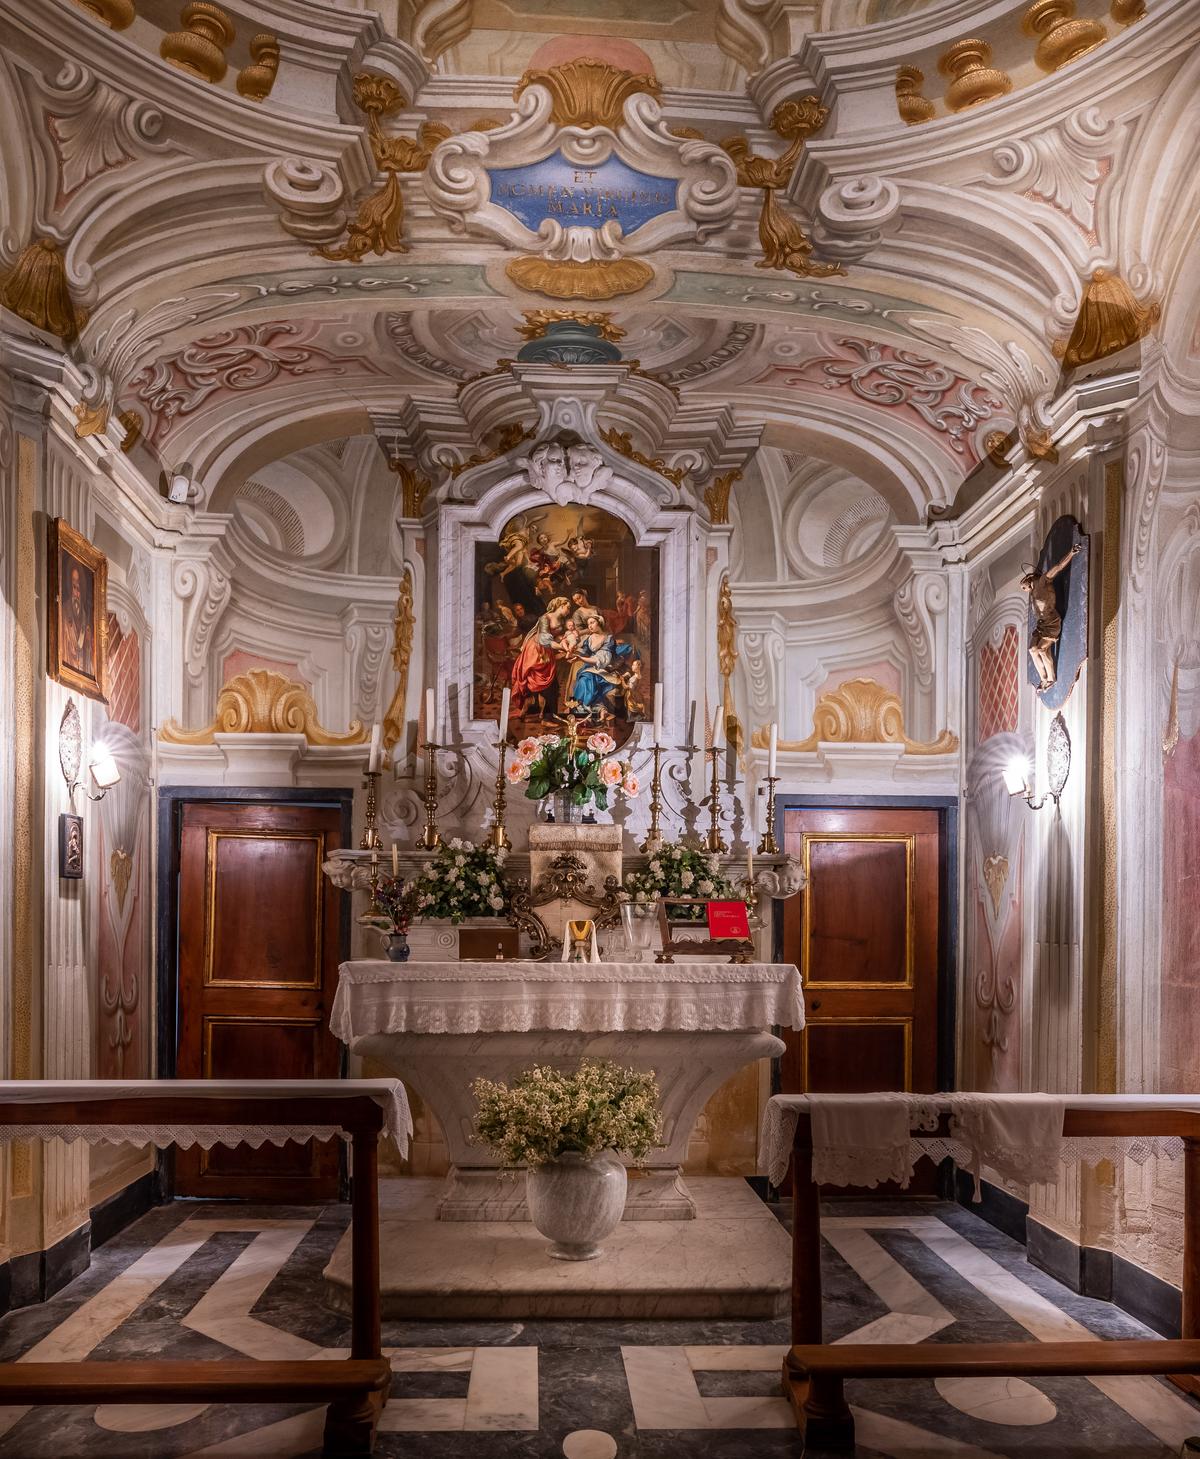 A chapel inside the villa features hand-painted frescoes and fine marble accents. (Courtesy of Savills)